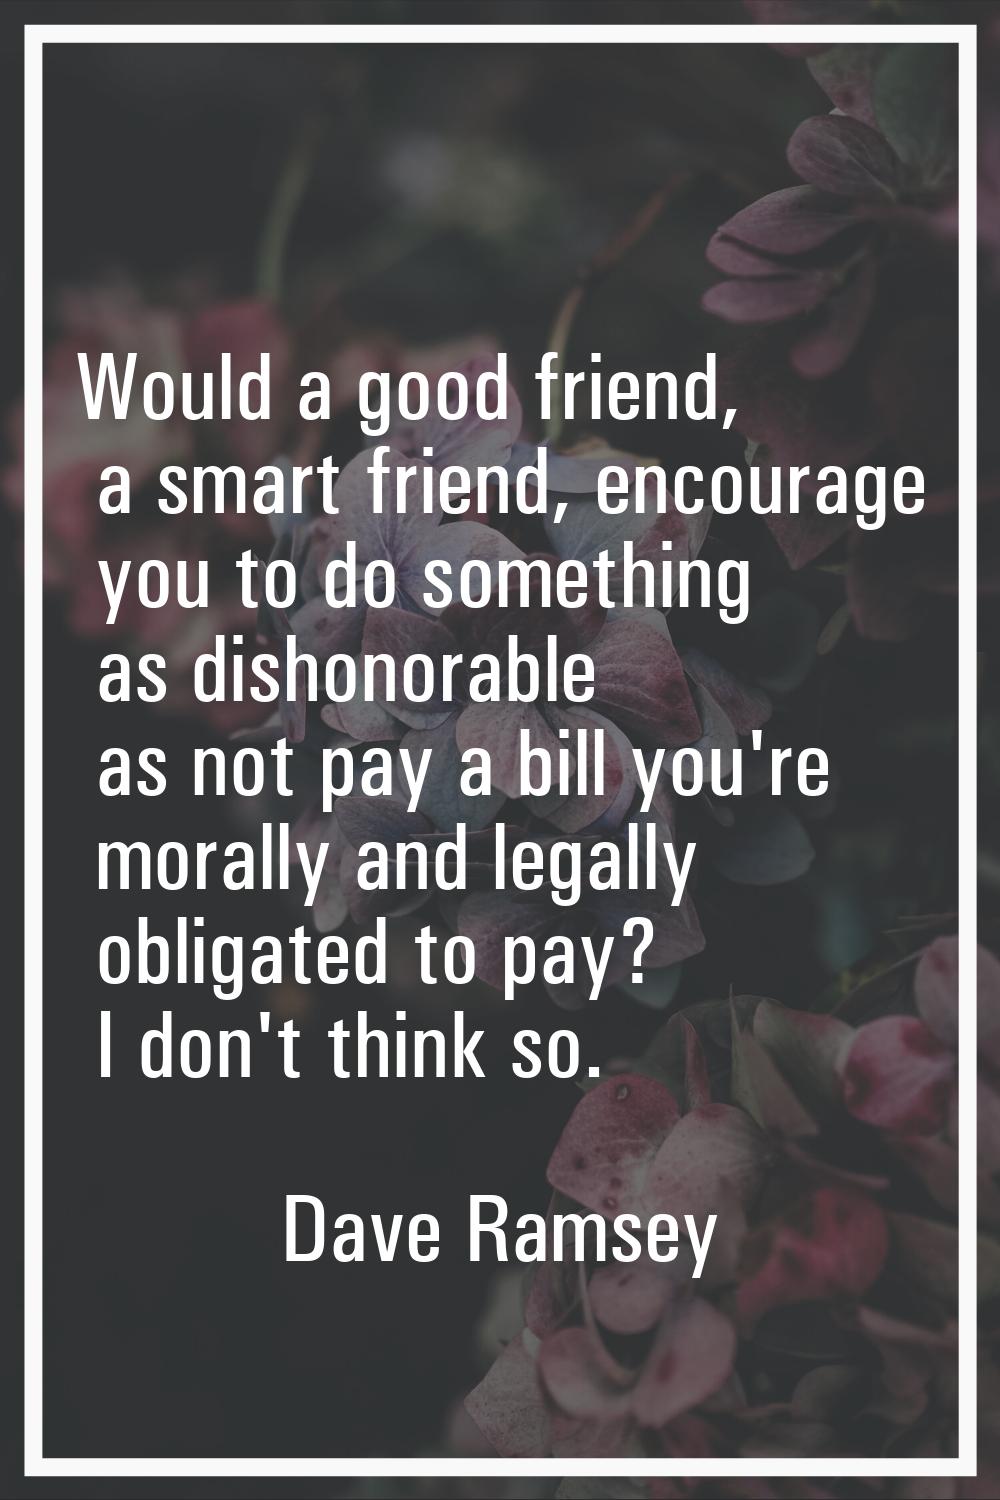 Would a good friend, a smart friend, encourage you to do something as dishonorable as not pay a bil